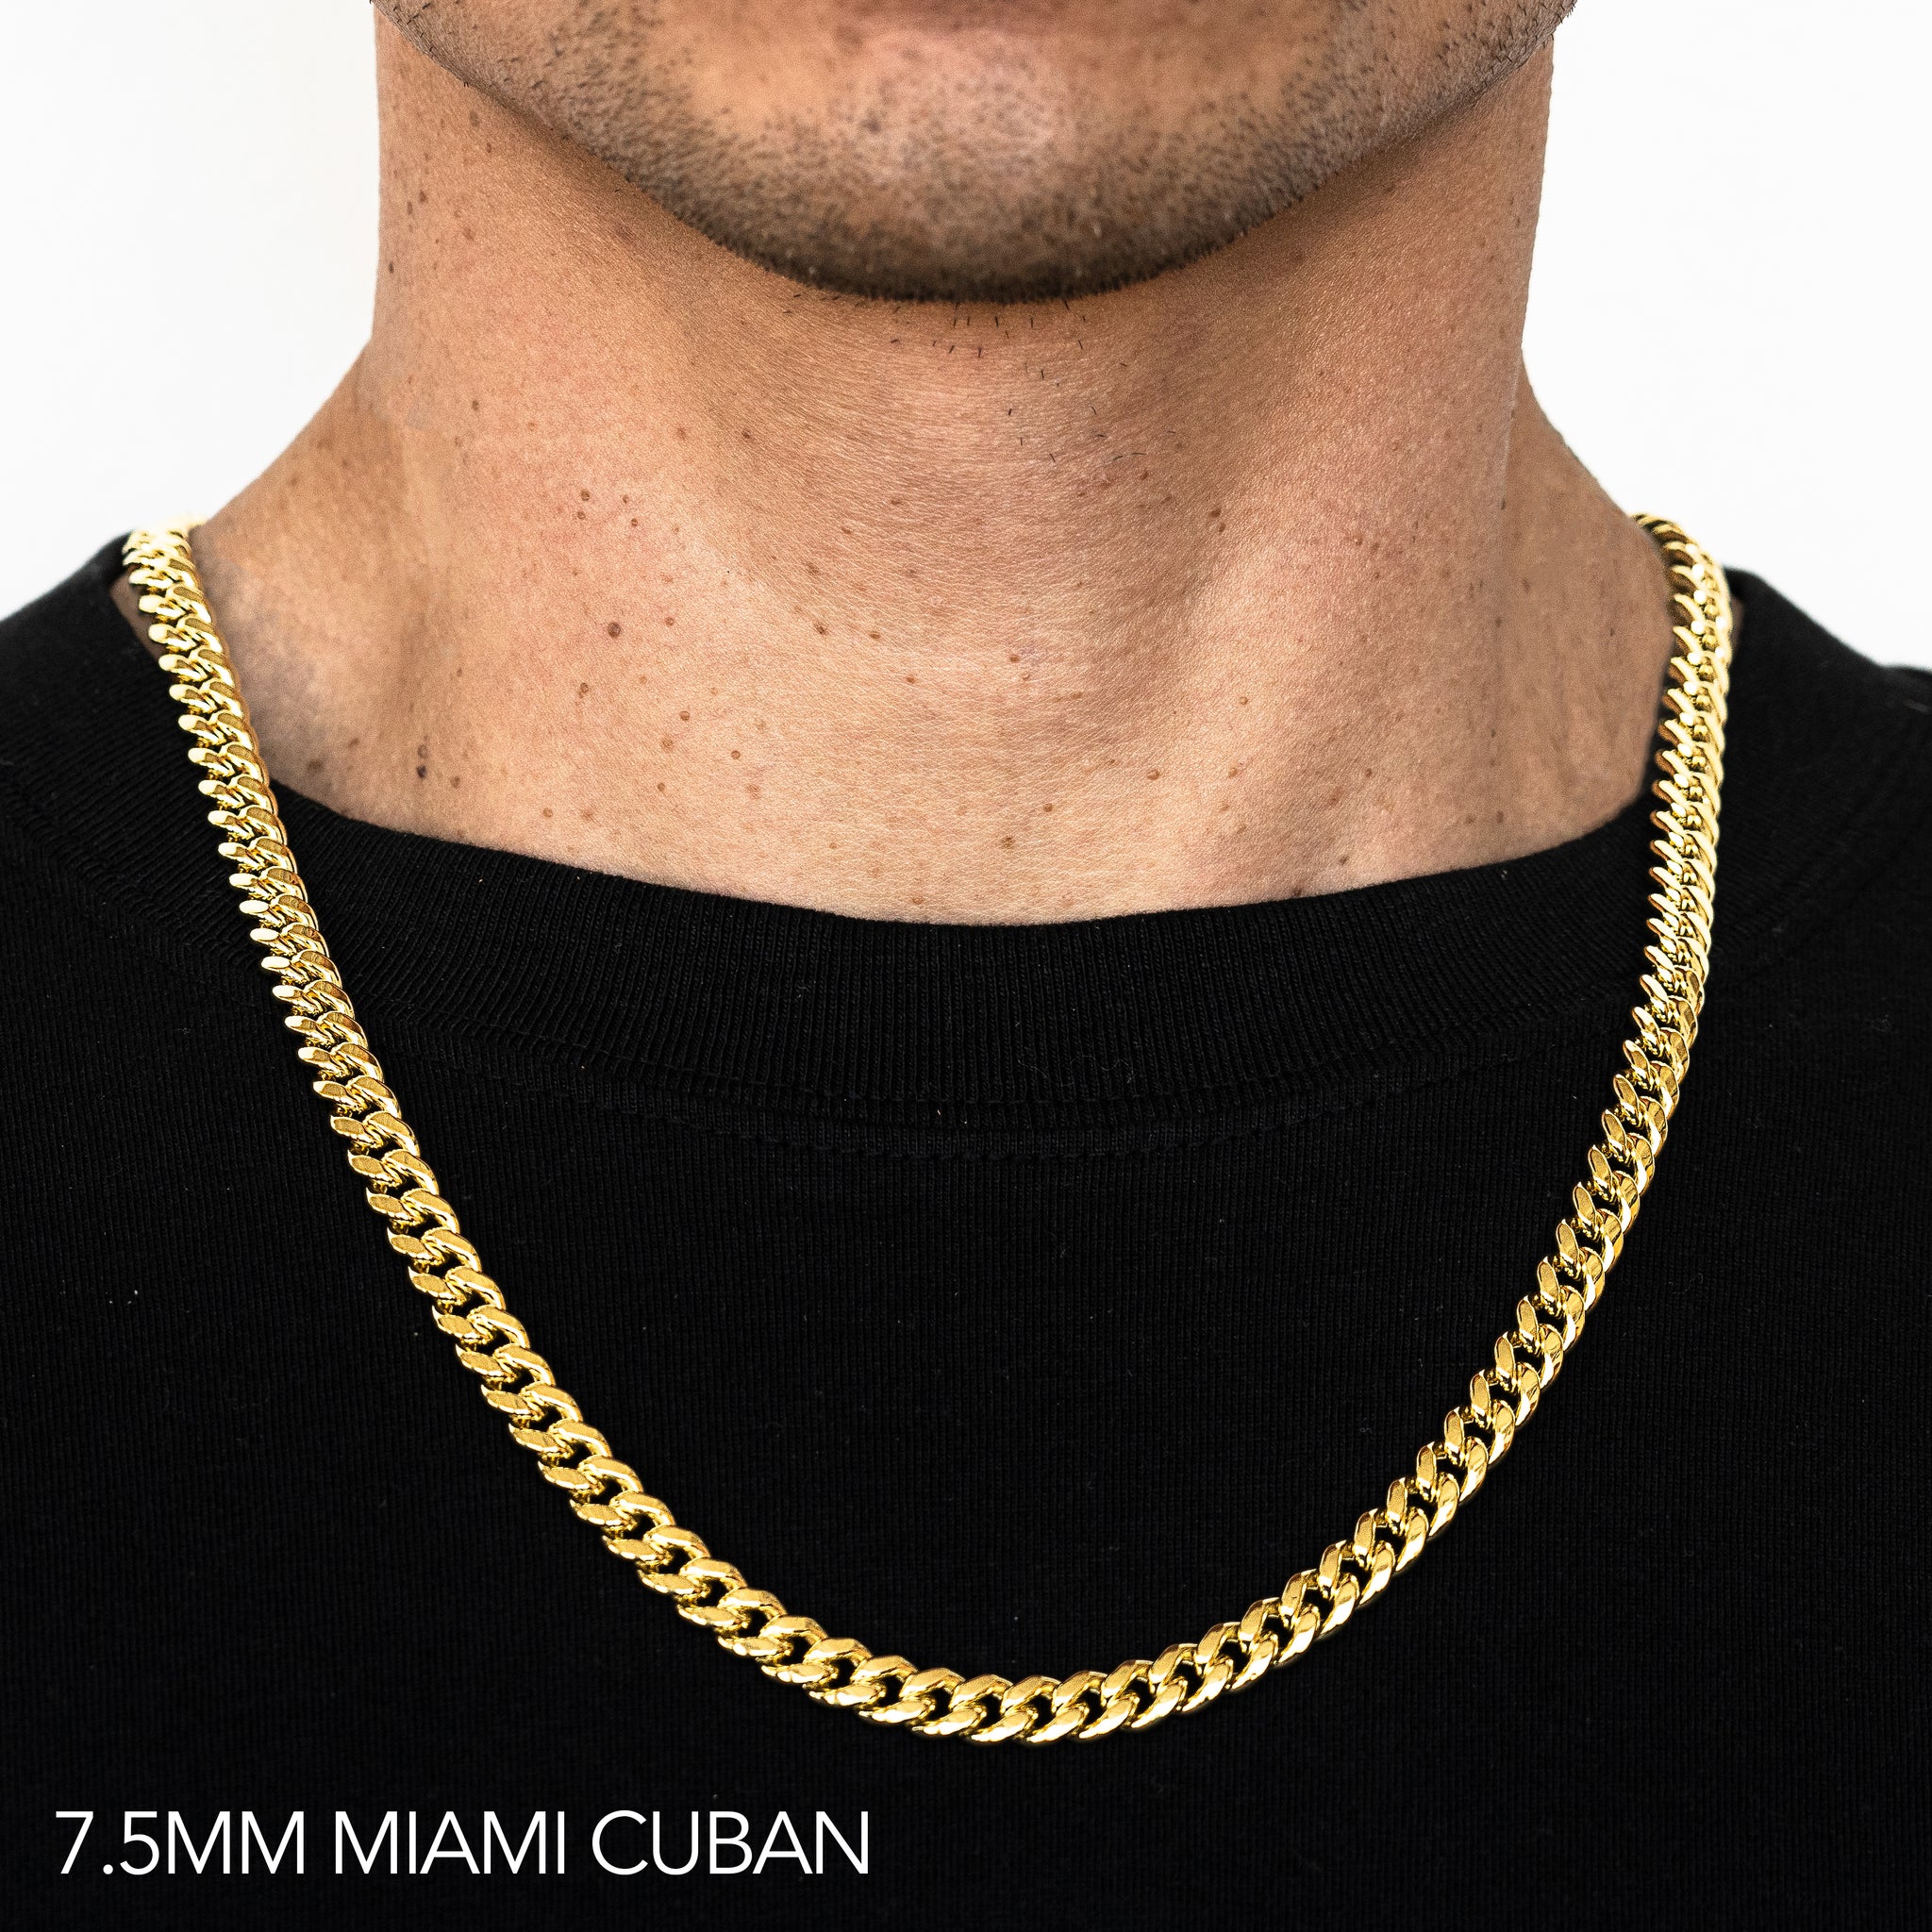 14K 7.5MM YELLOW GOLD HOLLOW MIAMI CUBAN 30 CHAIN NECKLACE"